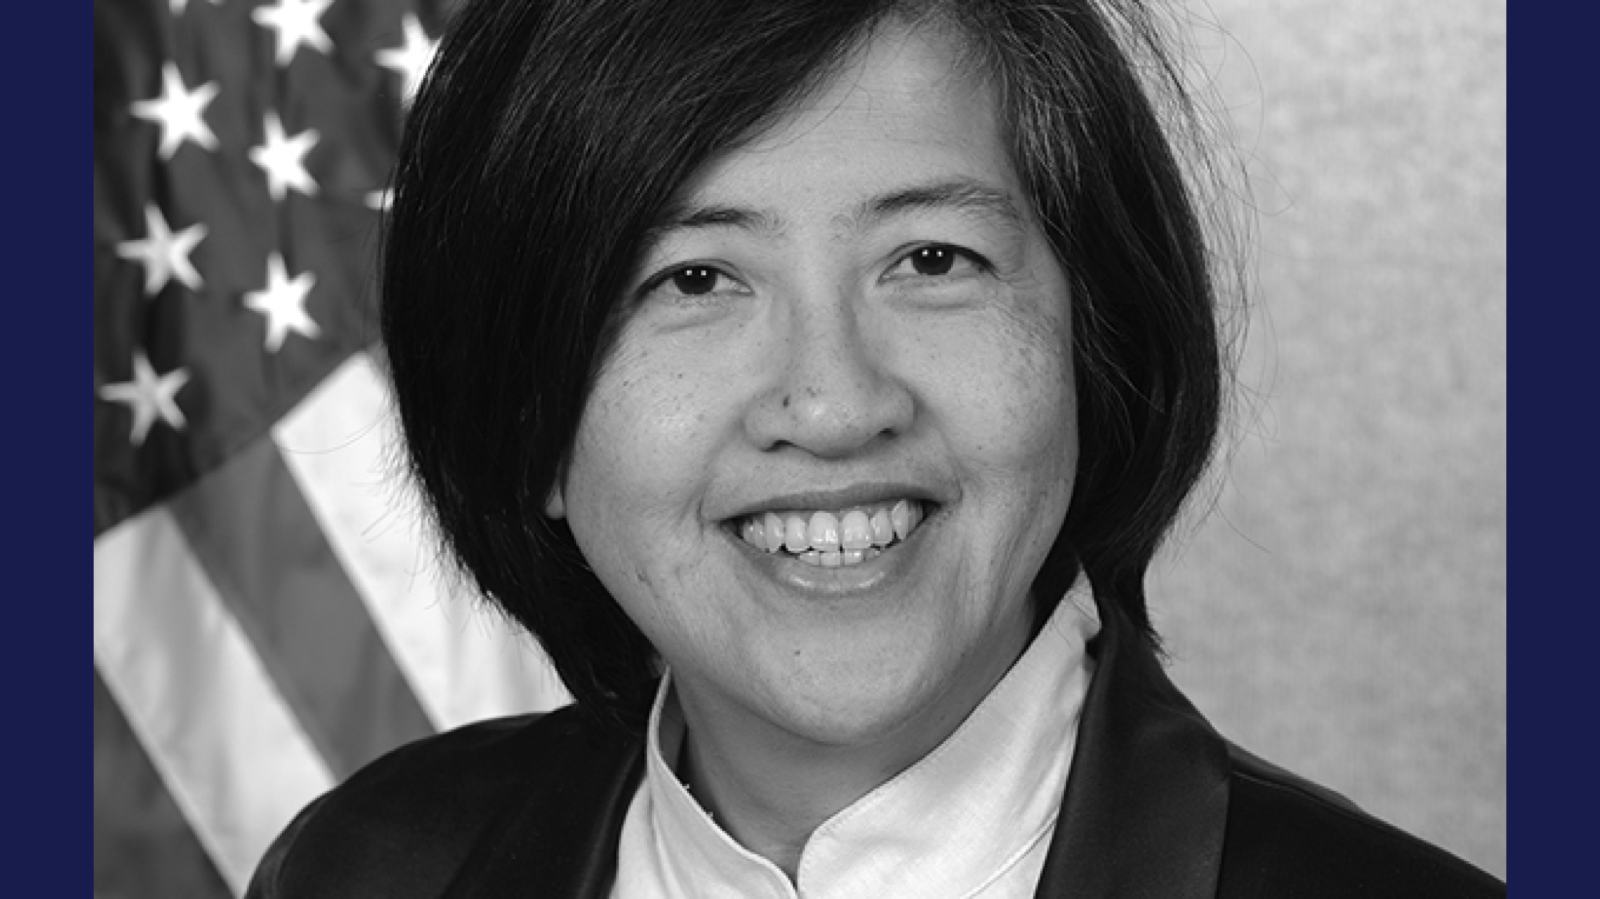 Chantale Wong is being appointed to an ambassadorship as U.S. Director of the Asian Development Bank